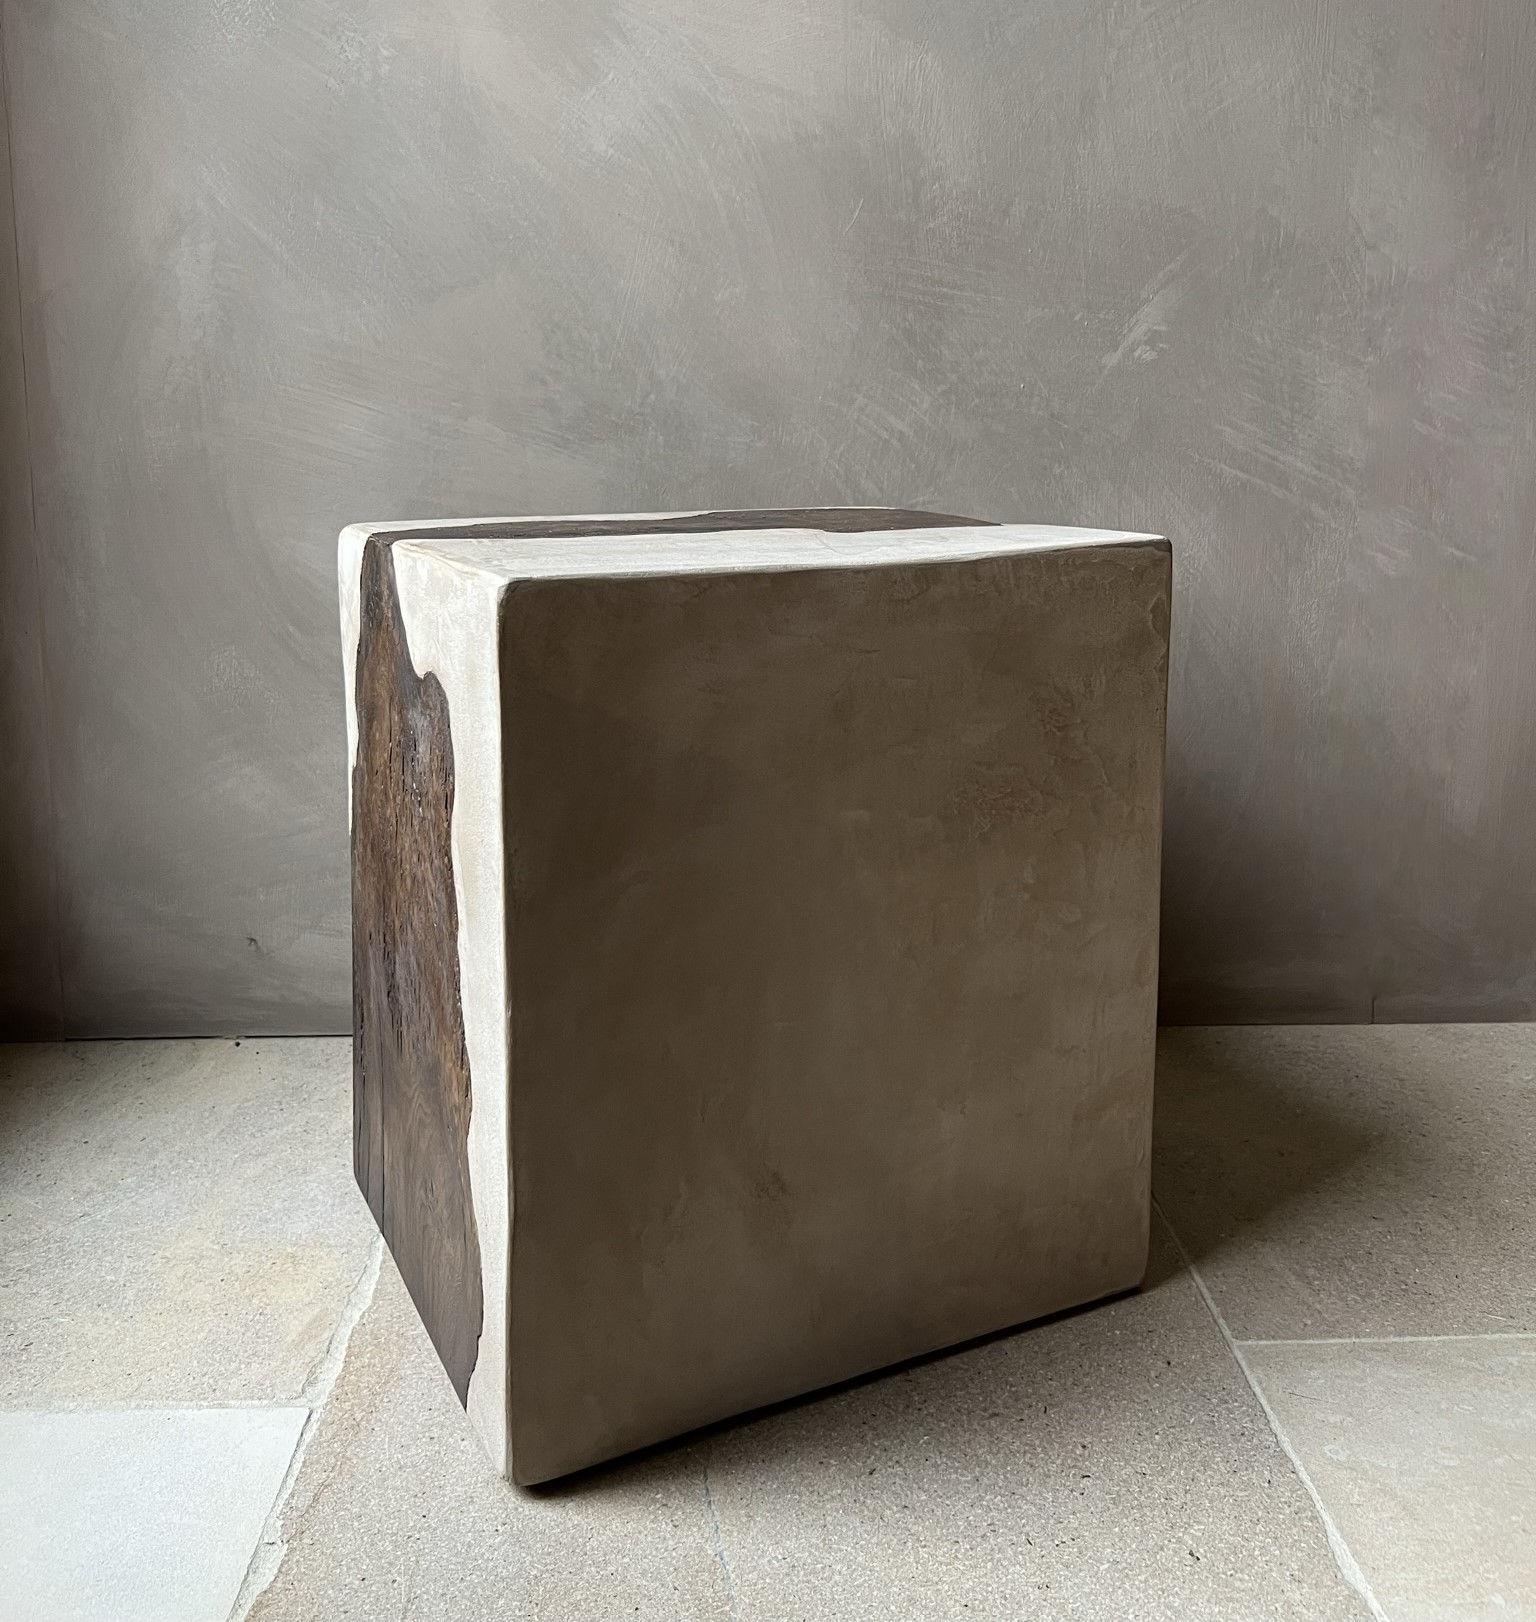 Our cube sidetable in marbleplaster and burlwood.